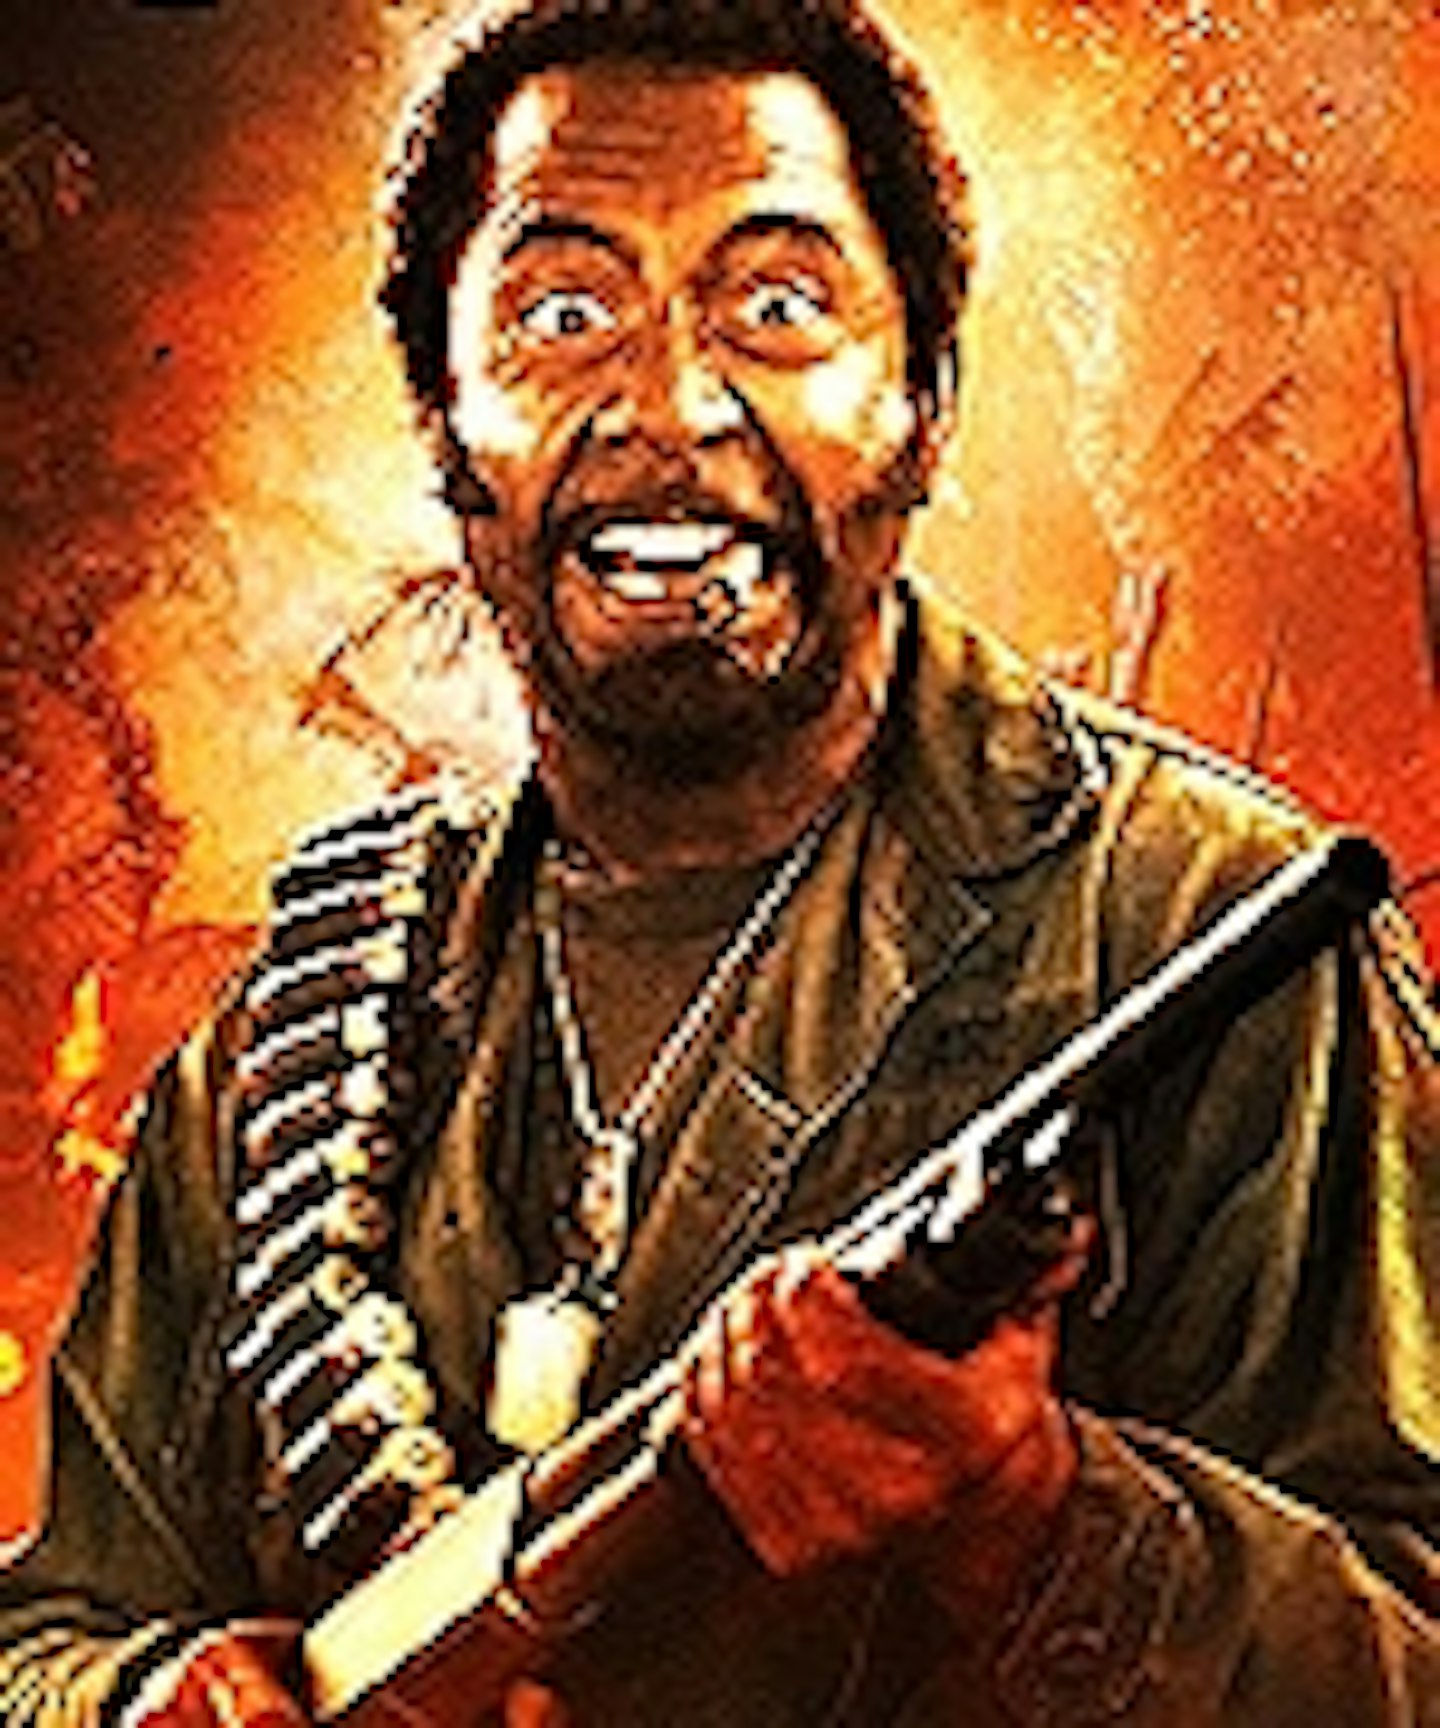 New Tropic Thunder Posters